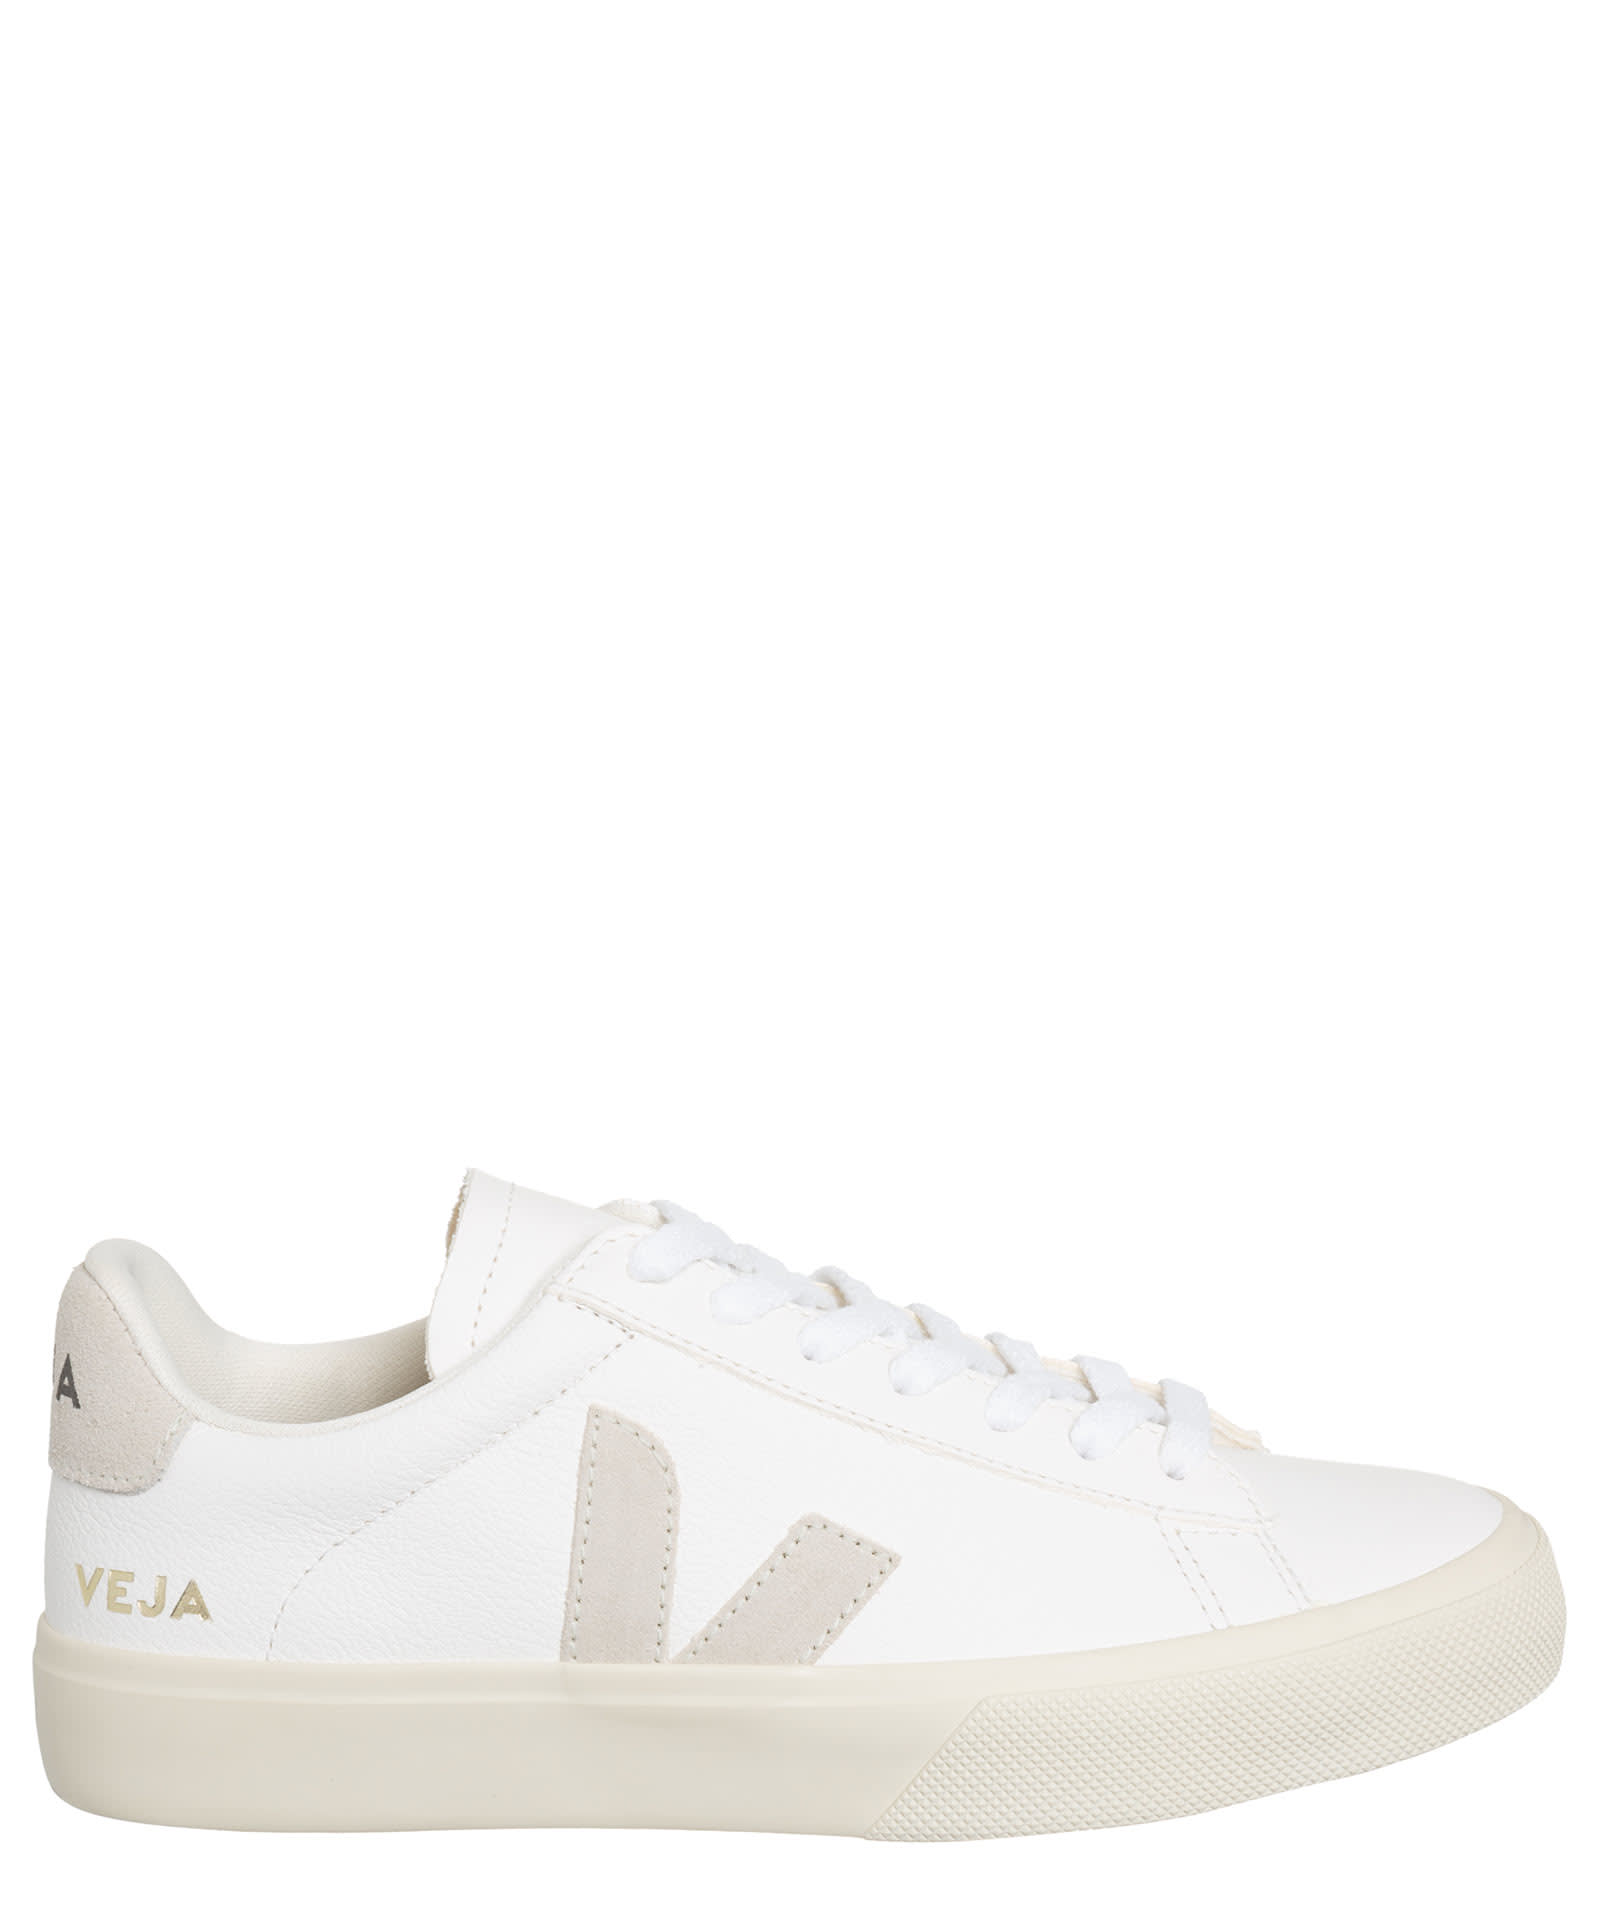 VEJA CAMPO LEATHER trainers